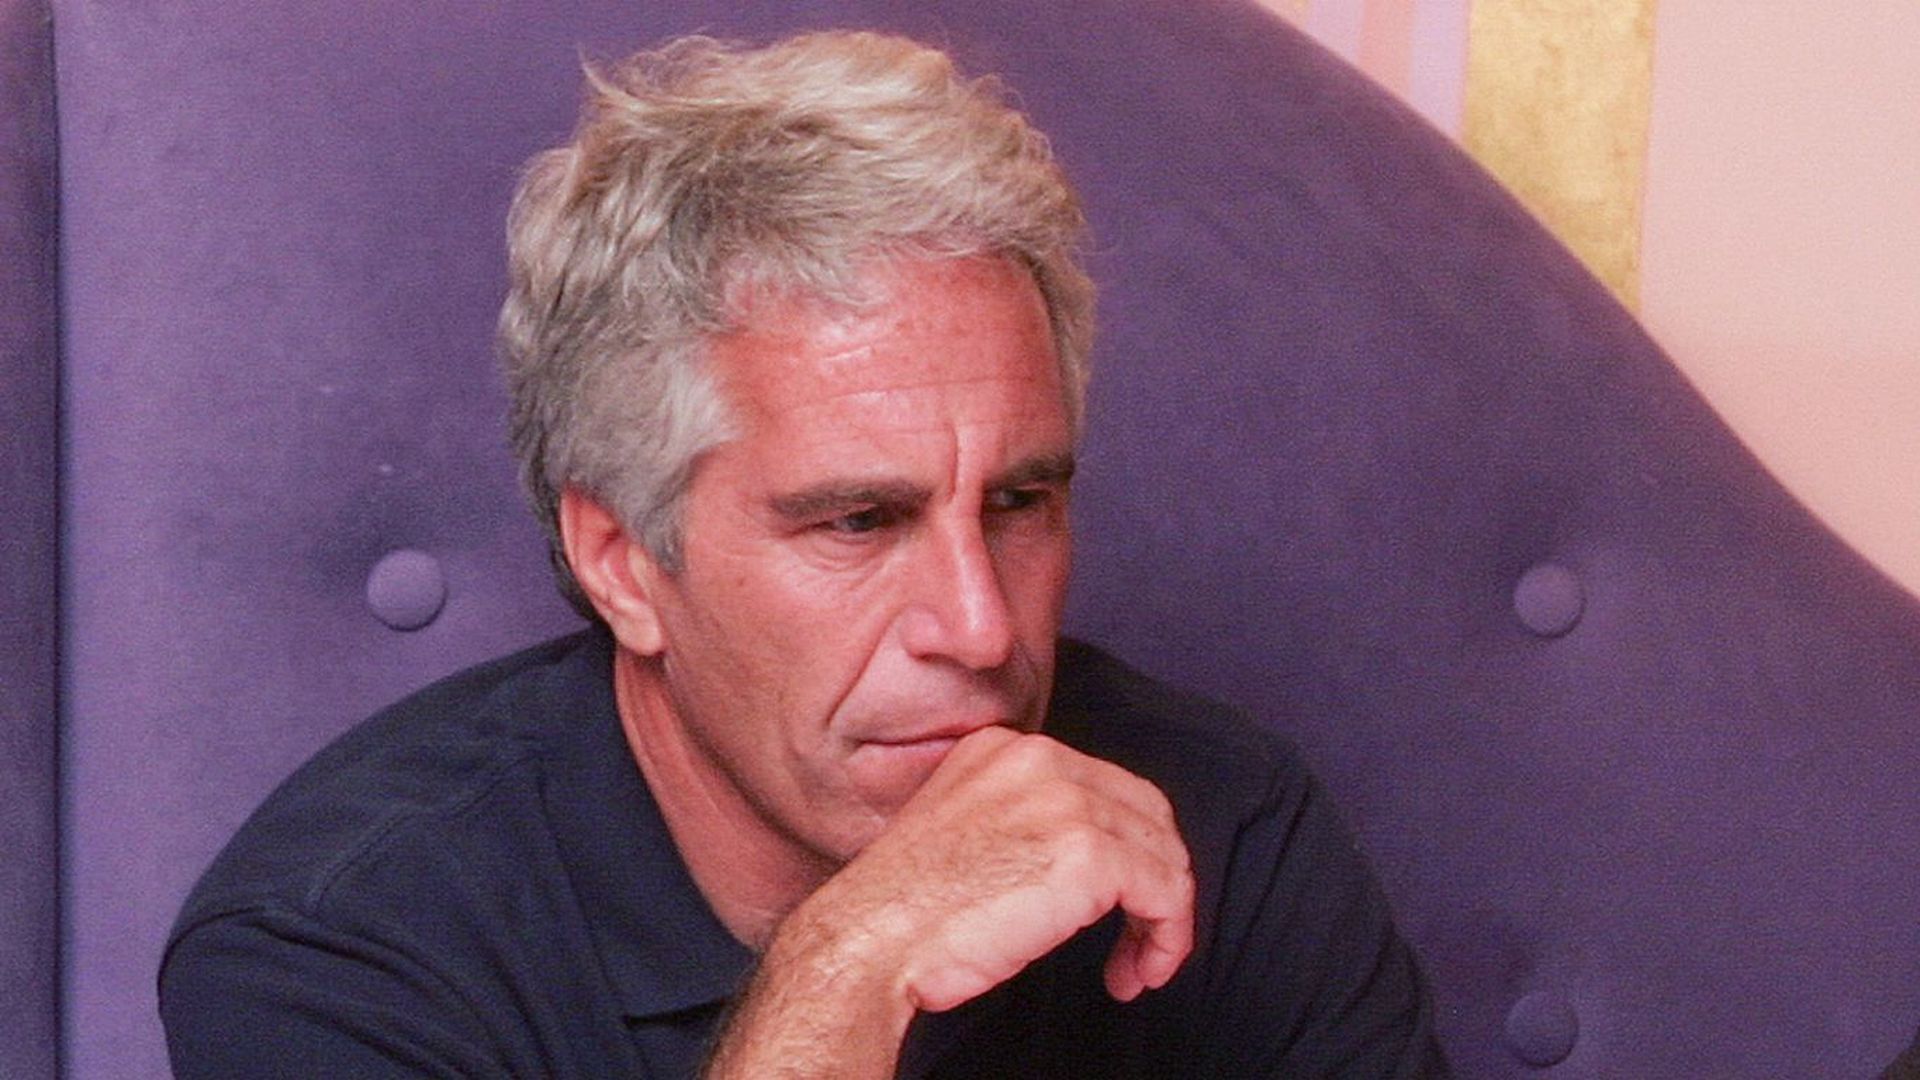 Jeffrey Epstein sits, posing for a photo.